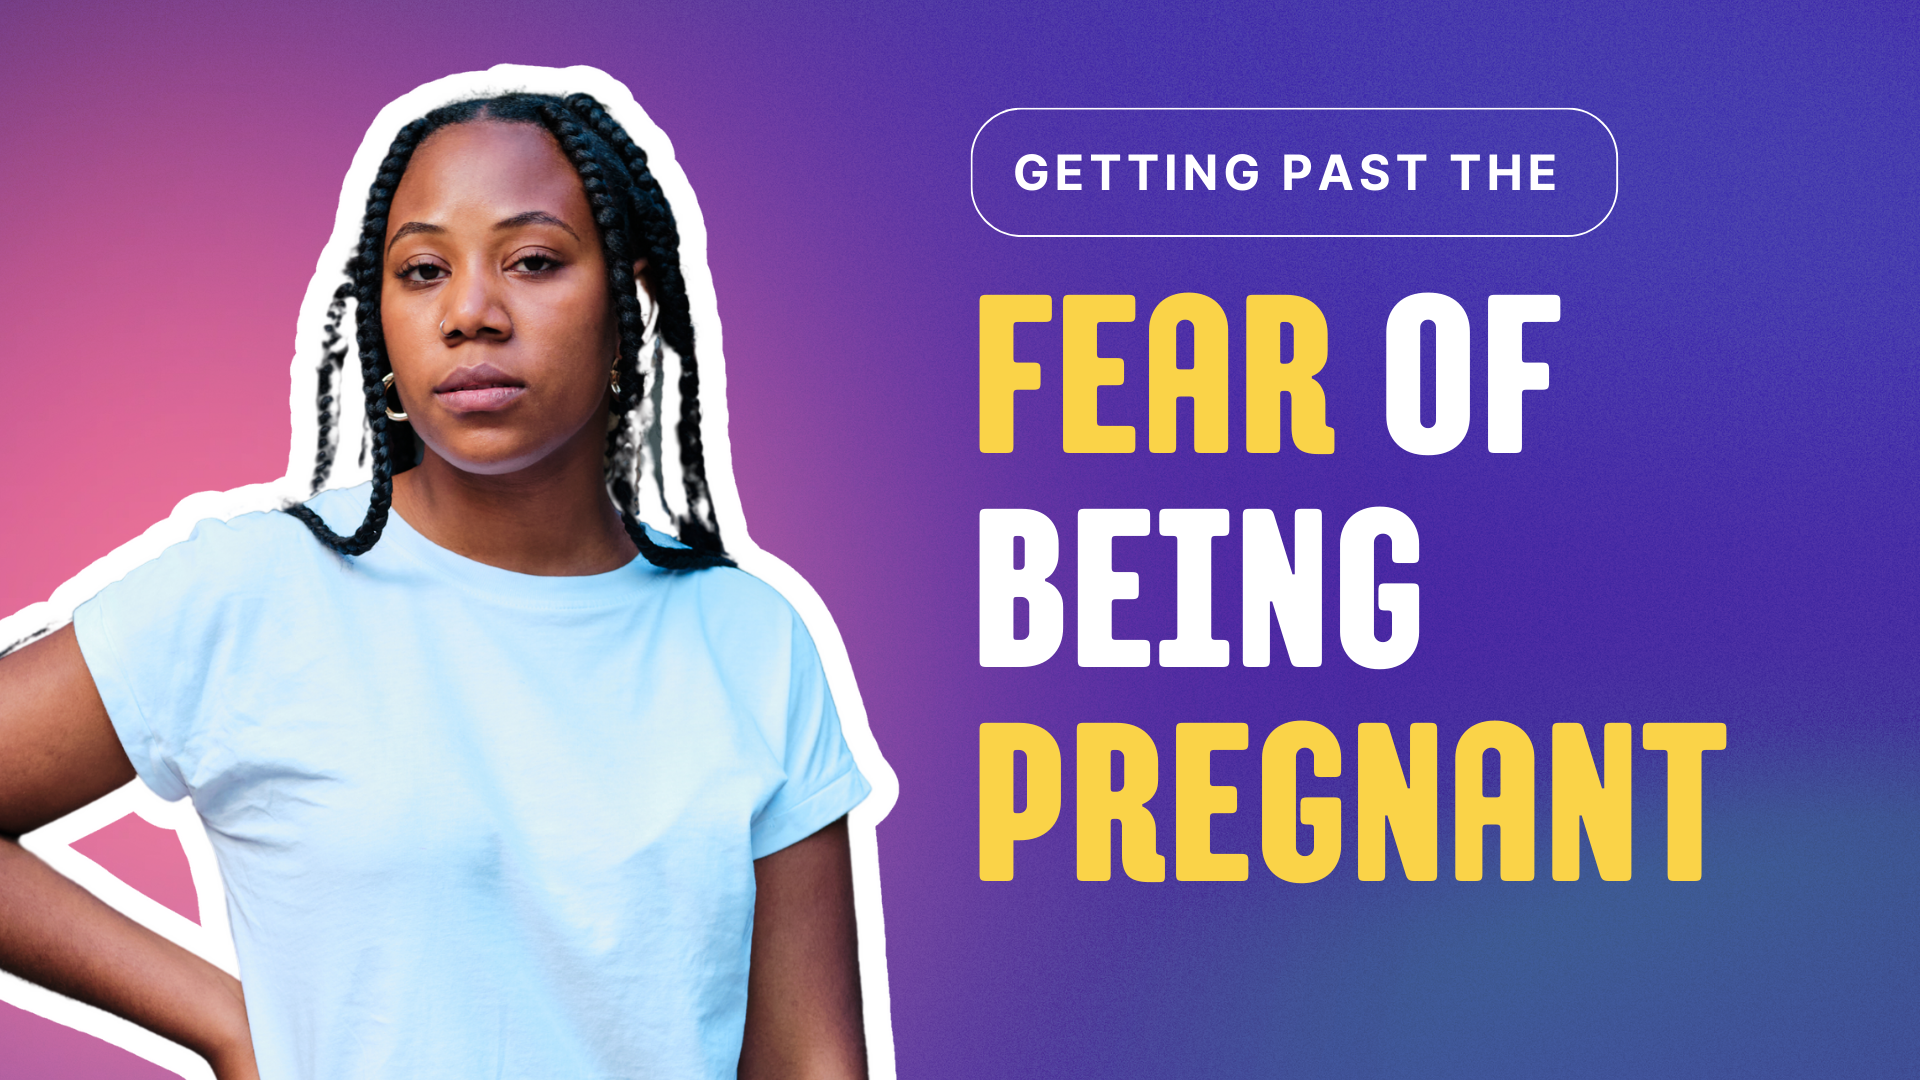 Learn how to get past the fear of being pregnant through some useful tips from the Problem Pregnancy Center, Southfield, Michigan. 

Tags: scared to get pregnant, fear of being pregnant, i'm too scared to get pregnant, how do i stop being scared of pregnancy, why am i scared of being pregnant, I don't want to be scared of pregnancy, i want to feel confident during pregnancy, i'm so fearful of being pregnant